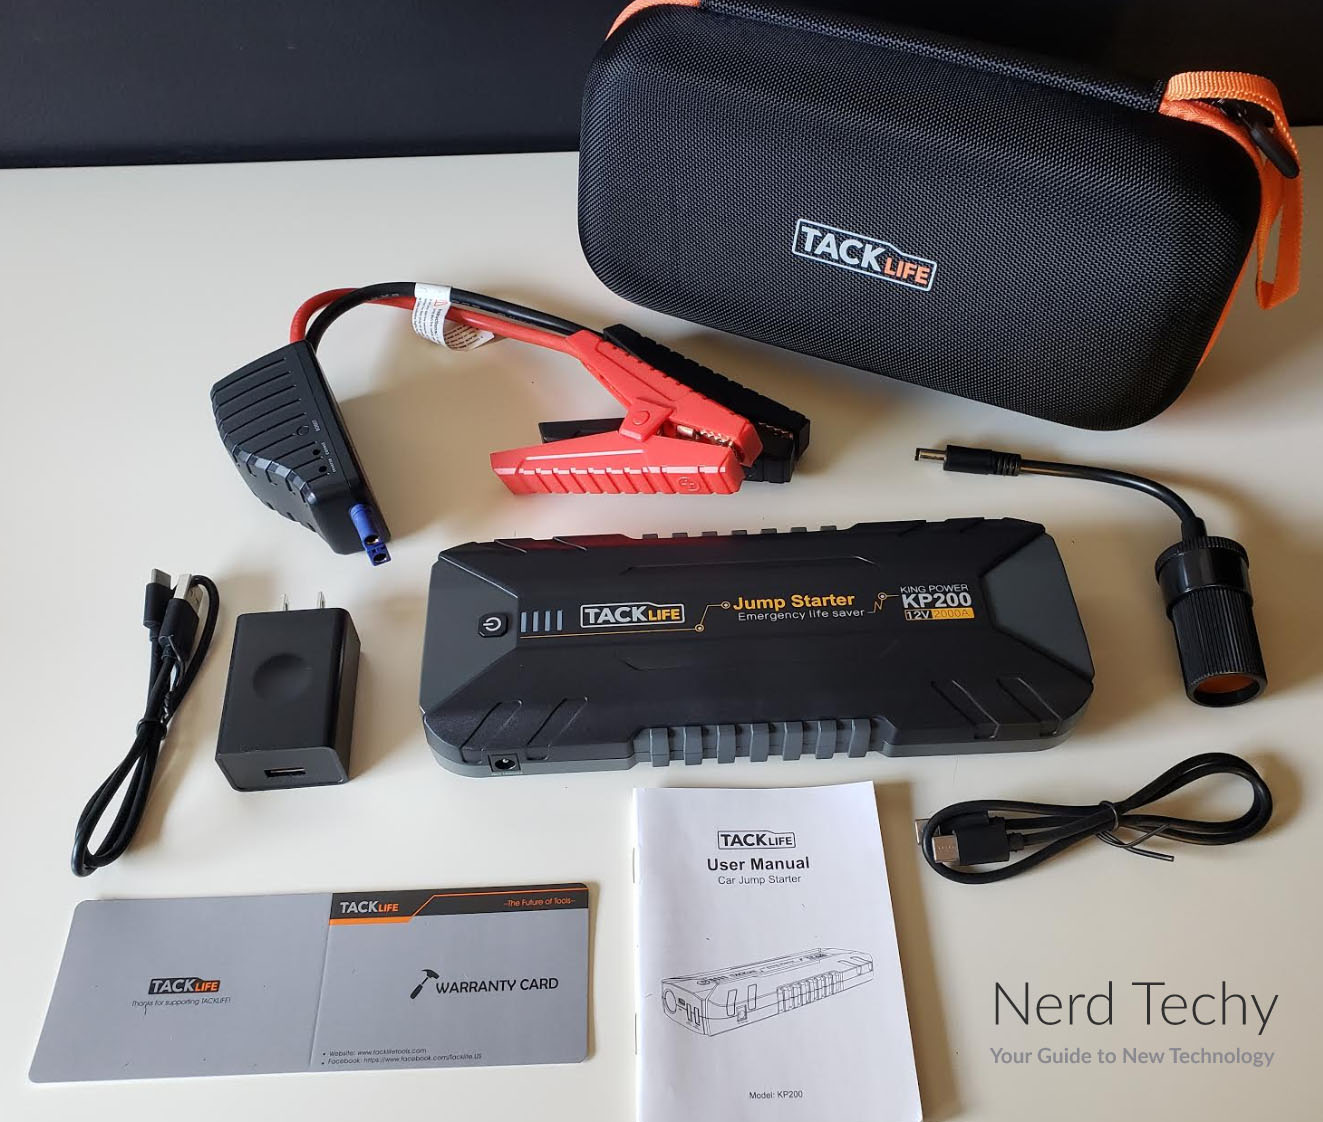 How does the Tacklife jump starter work?